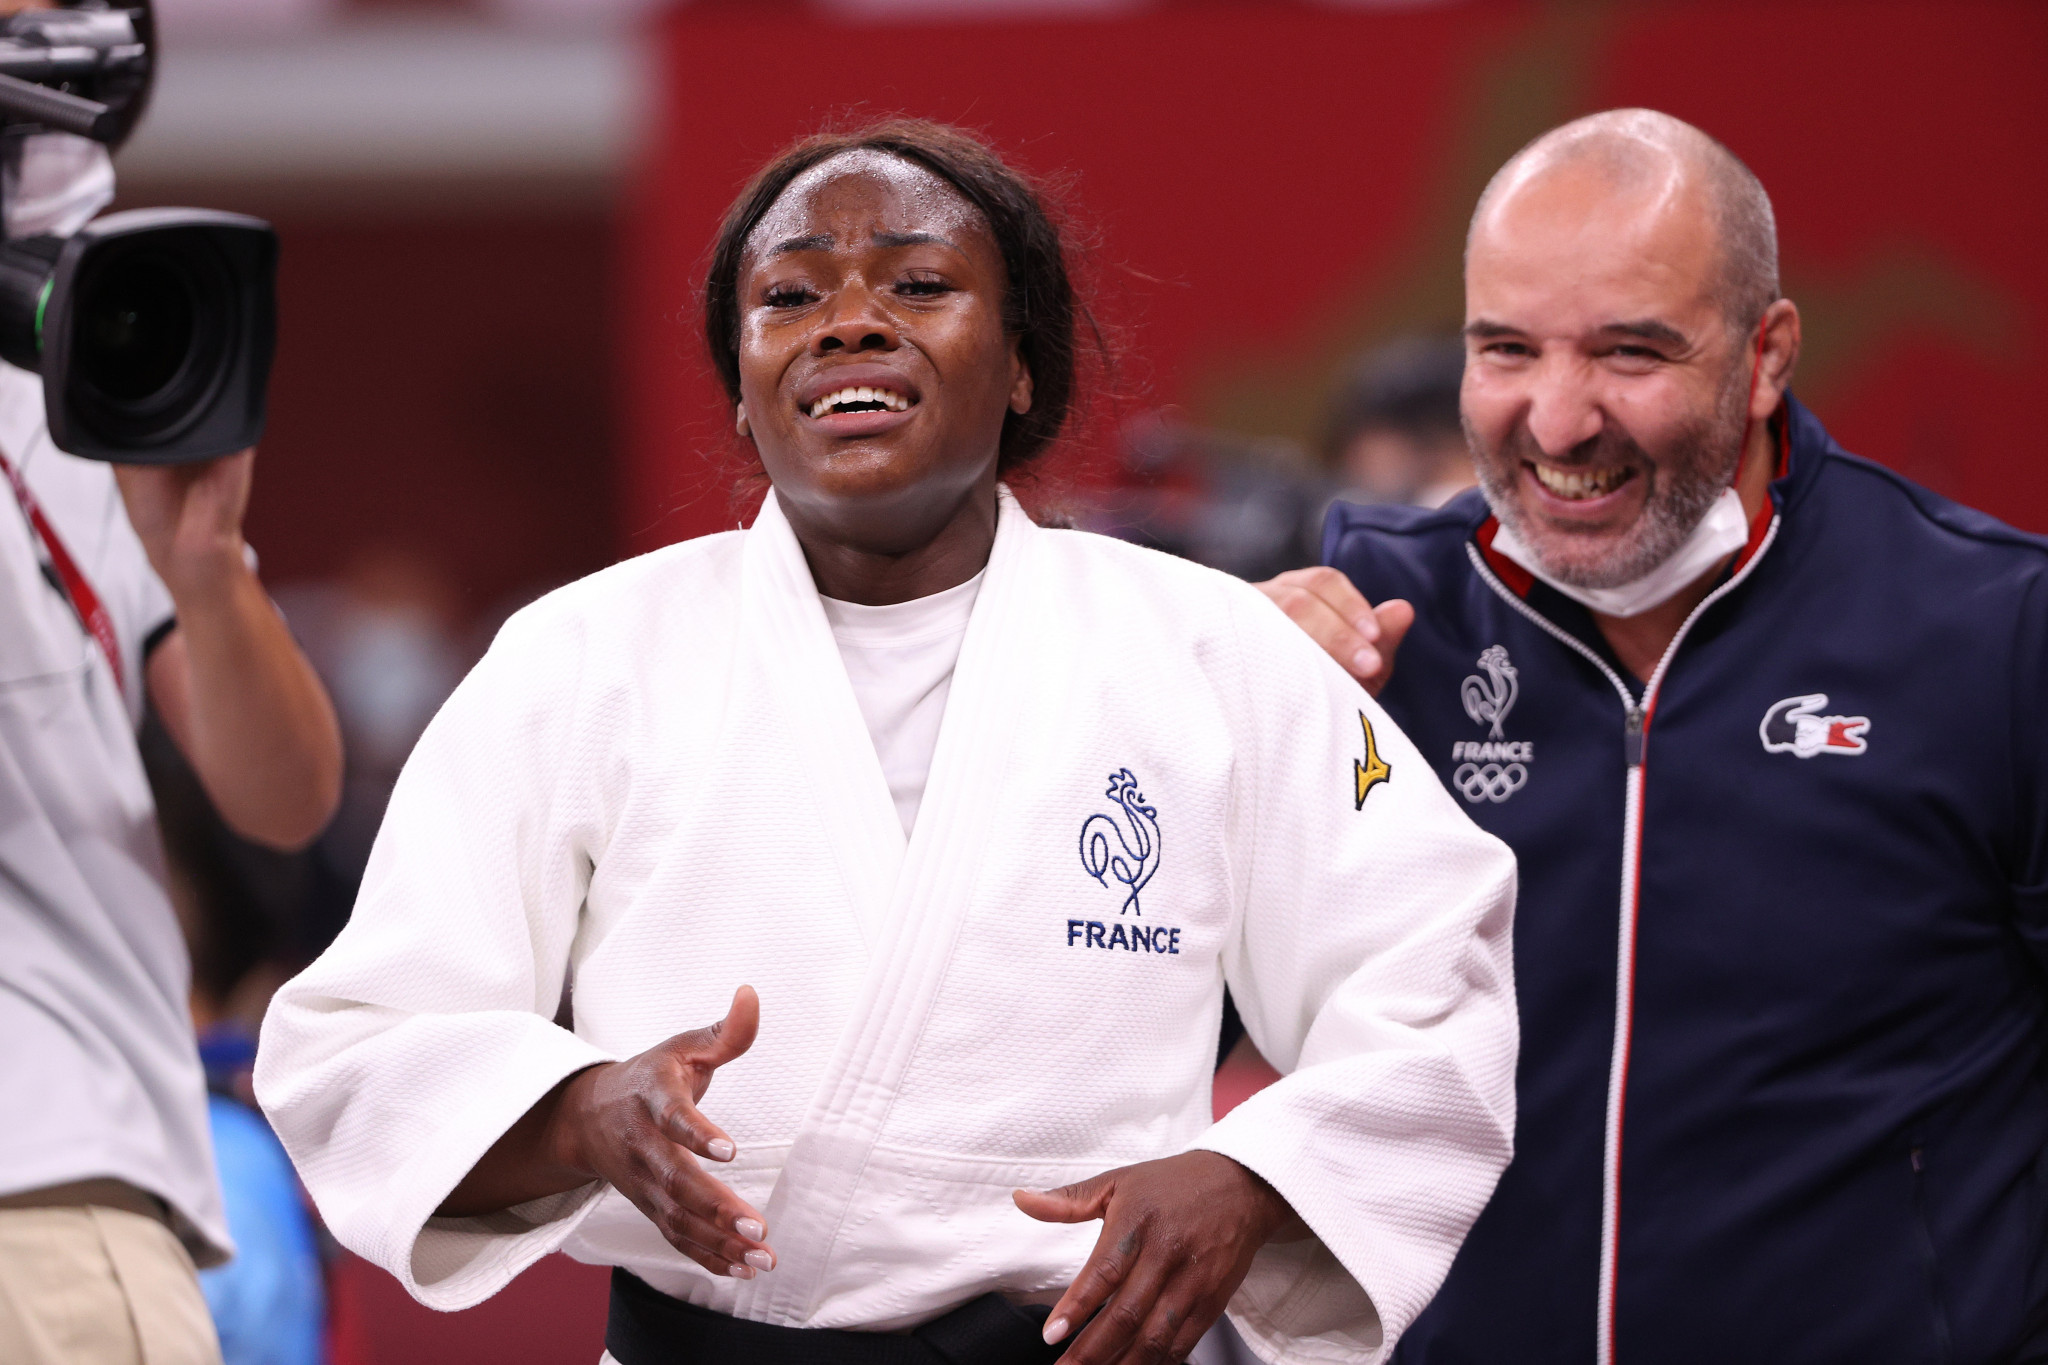 Clarisse Agbegnenou won individual and team gold for France at Tokyo 2020 ©Getty Images